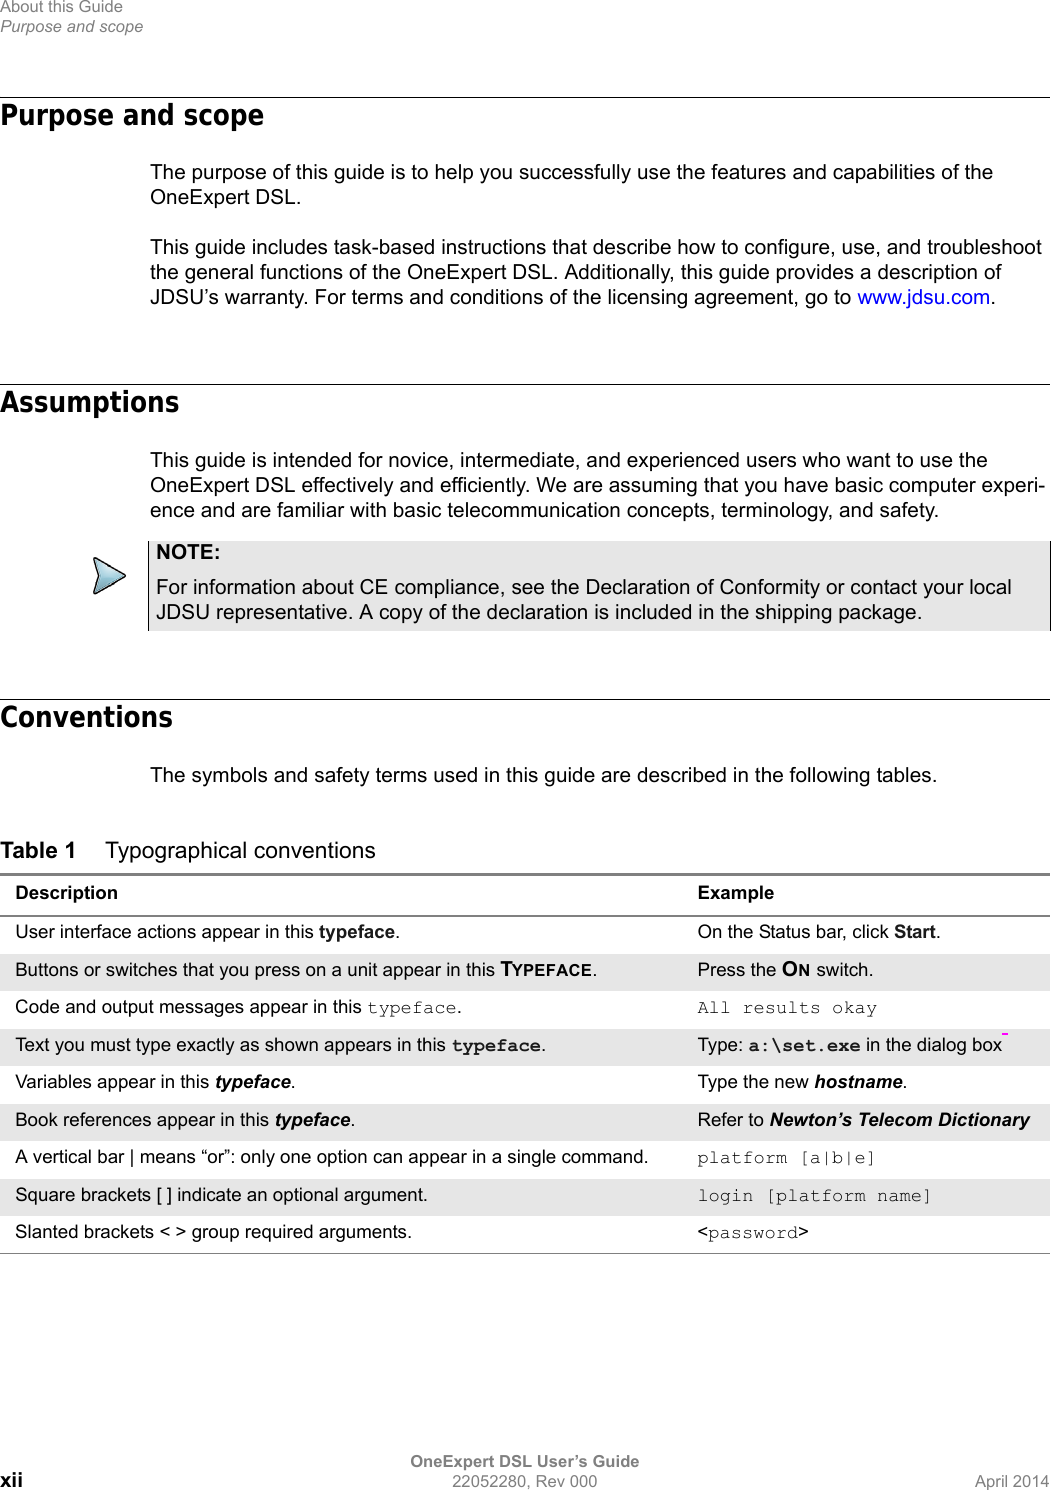 About this GuidePurpose and scopeOneExpert DSL User’s Guidexii 22052280, Rev 000 April 2014Purpose and scopeThe purpose of this guide is to help you successfully use the features and capabilities of the OneExpert DSL. This guide includes task-based instructions that describe how to configure, use, and troubleshoot the general functions of the OneExpert DSL. Additionally, this guide provides a description of JDSU’s warranty. For terms and conditions of the licensing agreement, go to www.jdsu.com.AssumptionsThis guide is intended for novice, intermediate, and experienced users who want to use the OneExpert DSL effectively and efficiently. We are assuming that you have basic computer experi-ence and are familiar with basic telecommunication concepts, terminology, and safety.ConventionsThe symbols and safety terms used in this guide are described in the following tables.NOTE:For information about CE compliance, see the Declaration of Conformity or contact your local JDSU representative. A copy of the declaration is included in the shipping package. Table 1 Typographical conventionsDescription ExampleUser interface actions appear in this typeface. On the Status bar, click Start.Buttons or switches that you press on a unit appear in this TYPEFACE.Press the ON switch.Code and output messages appear in this typeface.All results okayText you must type exactly as shown appears in this typeface.Type: a:\set.exe in the dialog box Variables appear in this typeface. Type the new hostname.Book references appear in this typeface.  Refer to Newton’s Telecom DictionaryA vertical bar | means “or”: only one option can appear in a single command. platform [a|b|e]Square brackets [ ] indicate an optional argument. login [platform name]Slanted brackets &lt; &gt; group required arguments. &lt;password&gt;